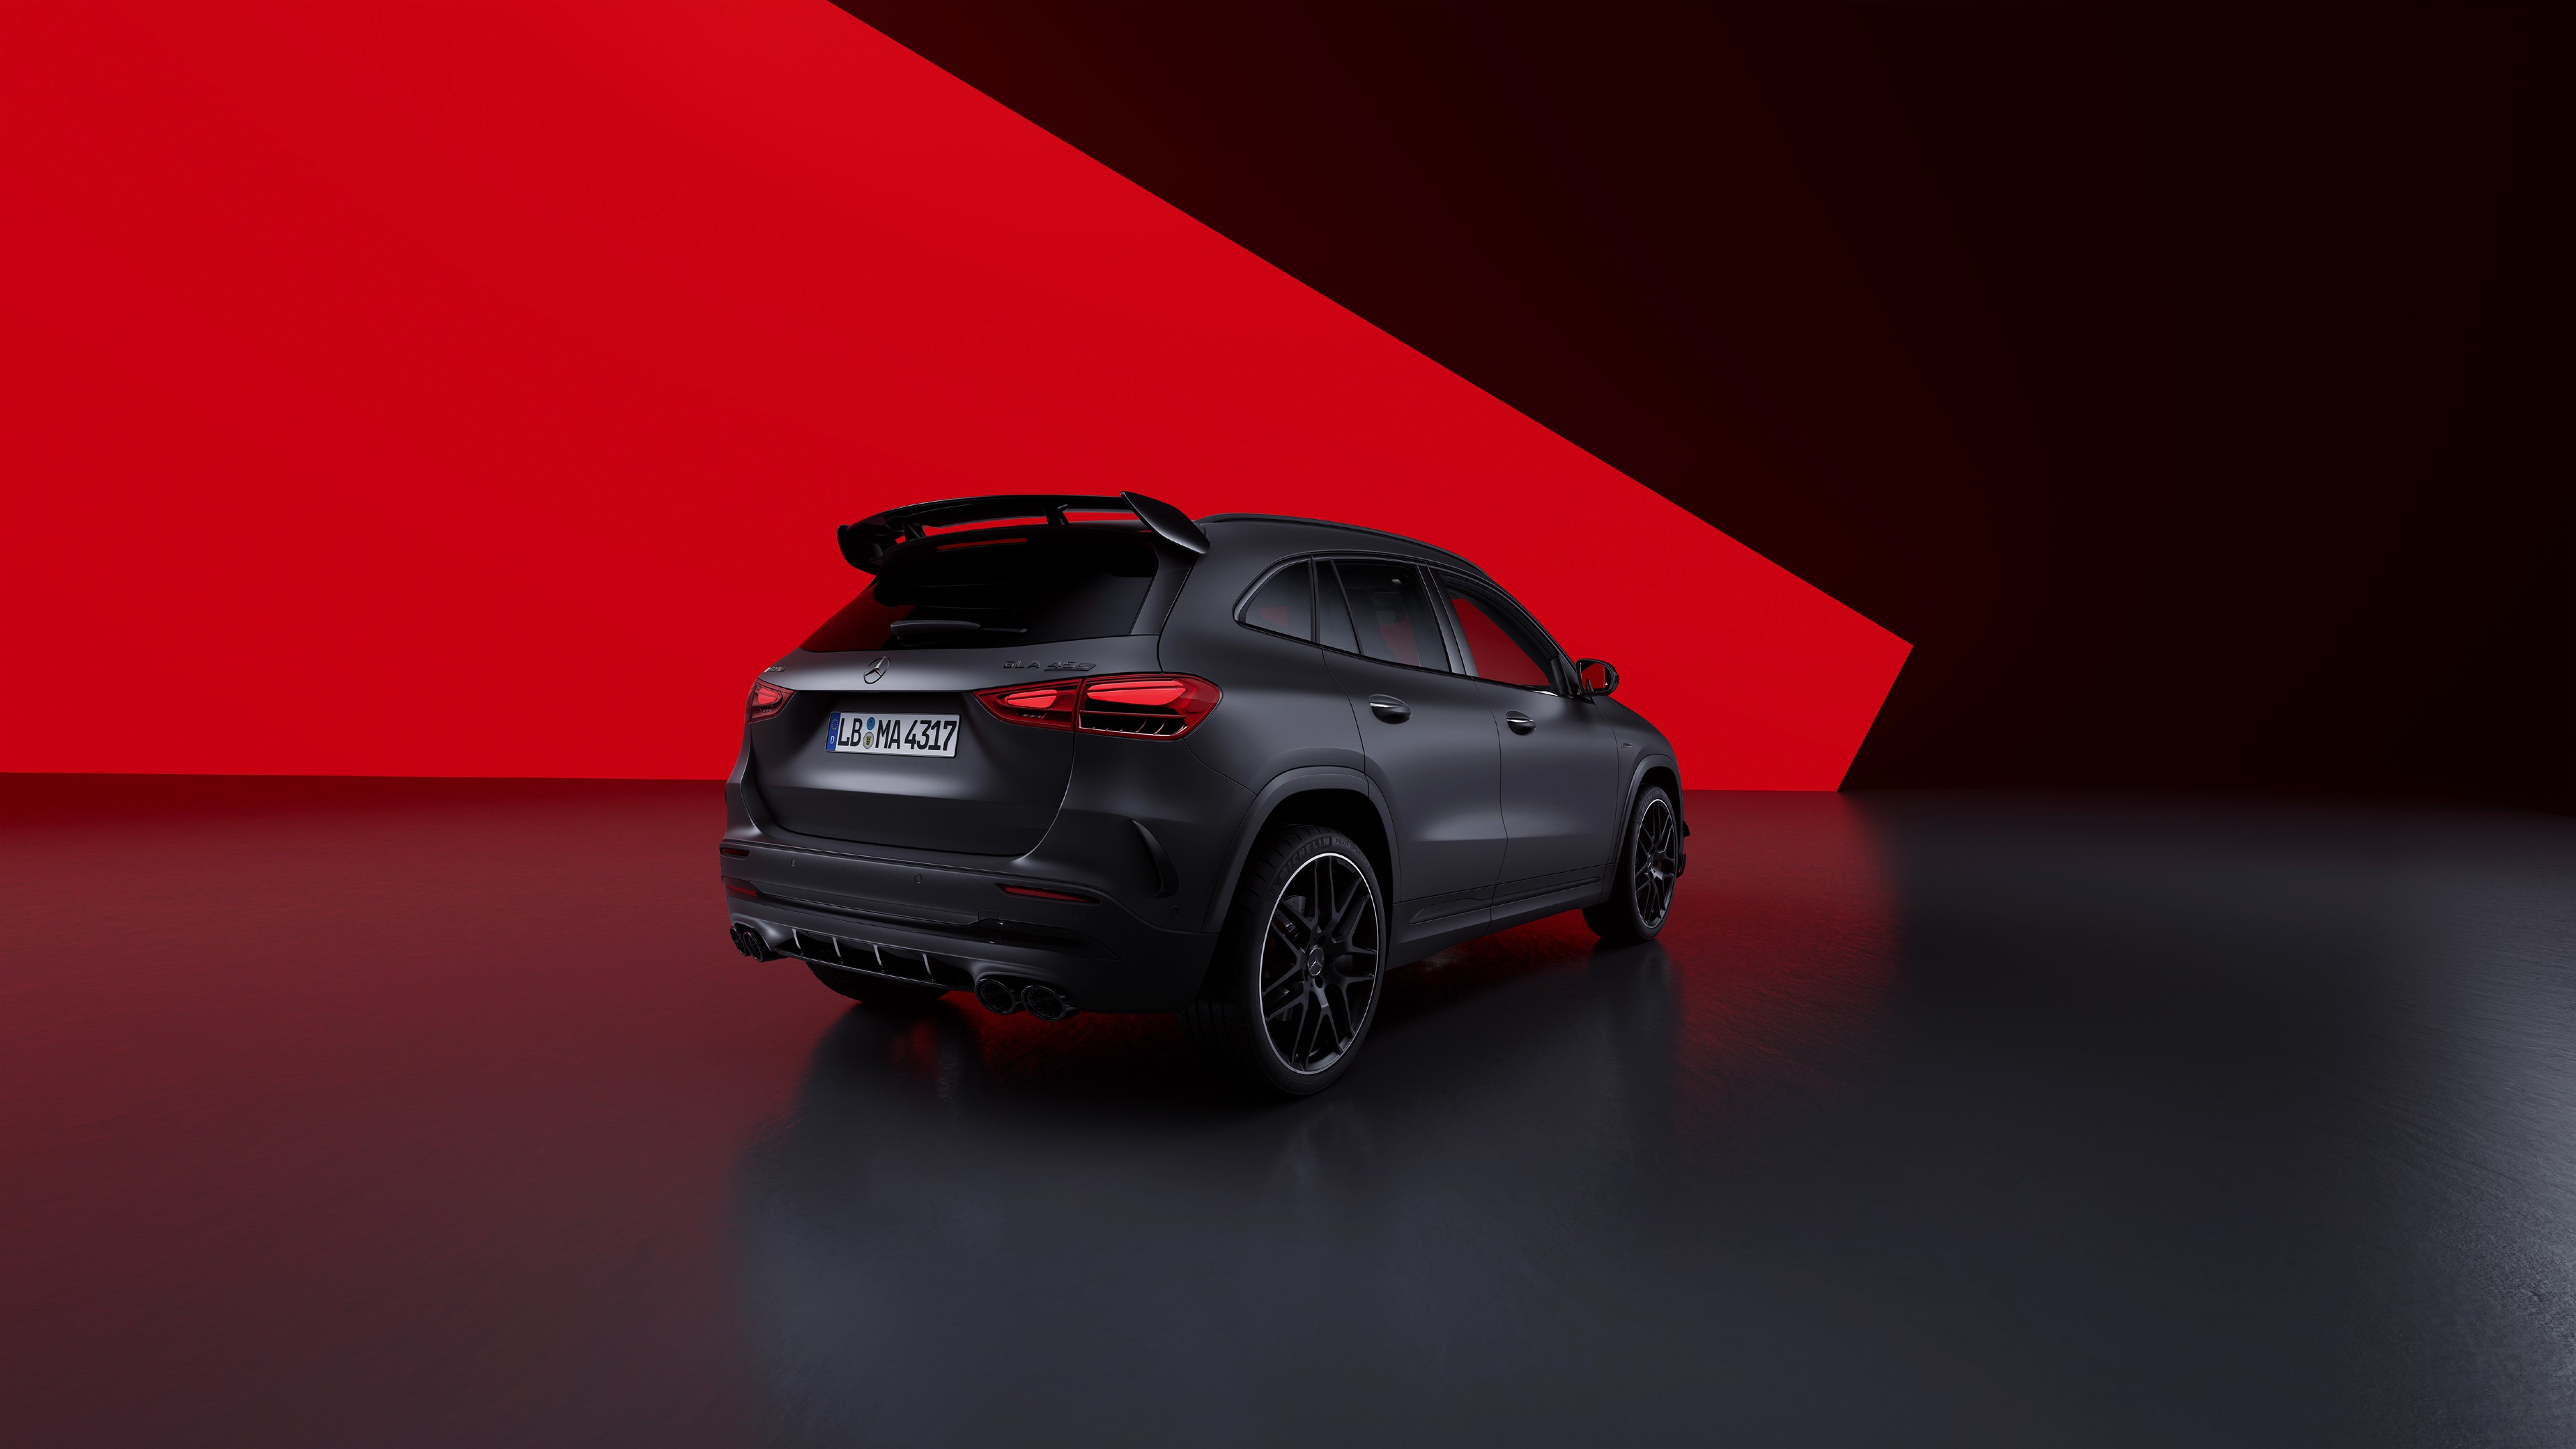 The 2024 Mercedes-AMG GLA 45 S packs the 2.0-litre turbocharged, four-cylinder petrol engine with 415.7 bhp and 500 Nm of peak torque